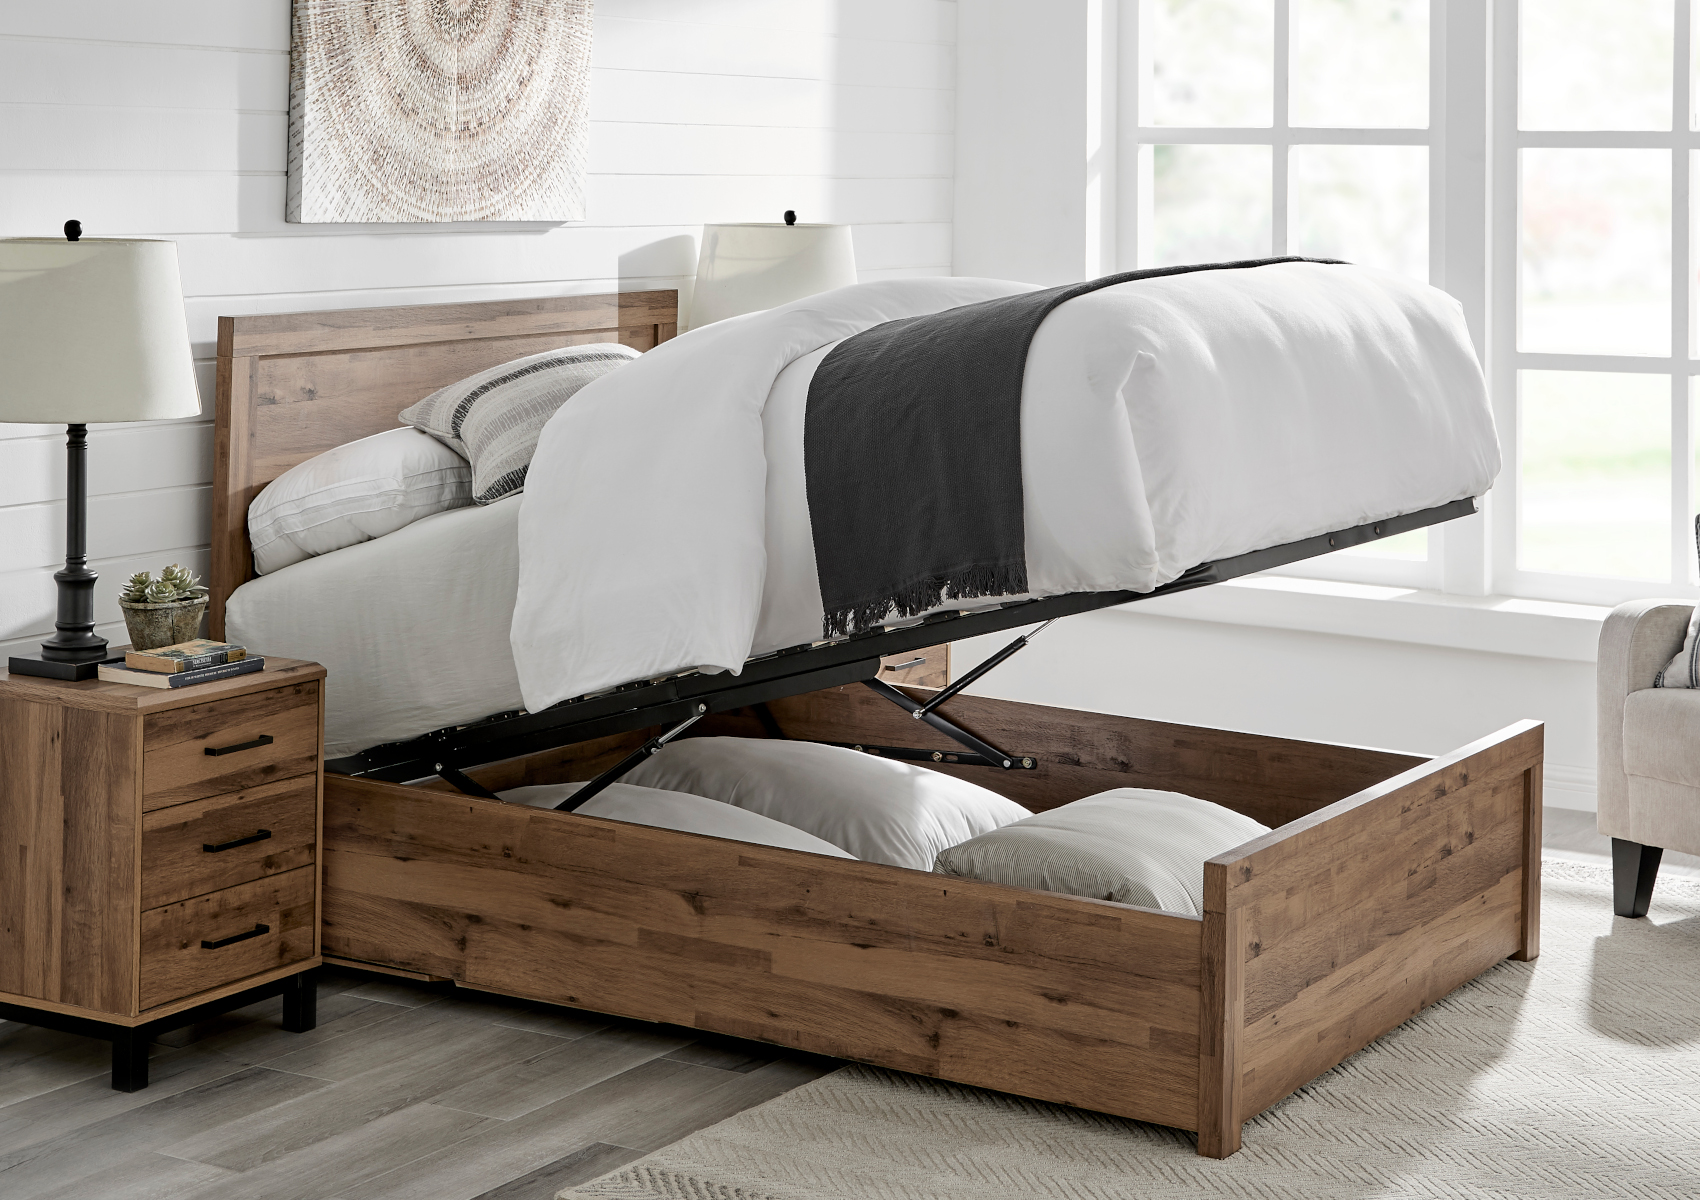 View Brookes Wooden Ottoman Storage Bed Time4Sleep information